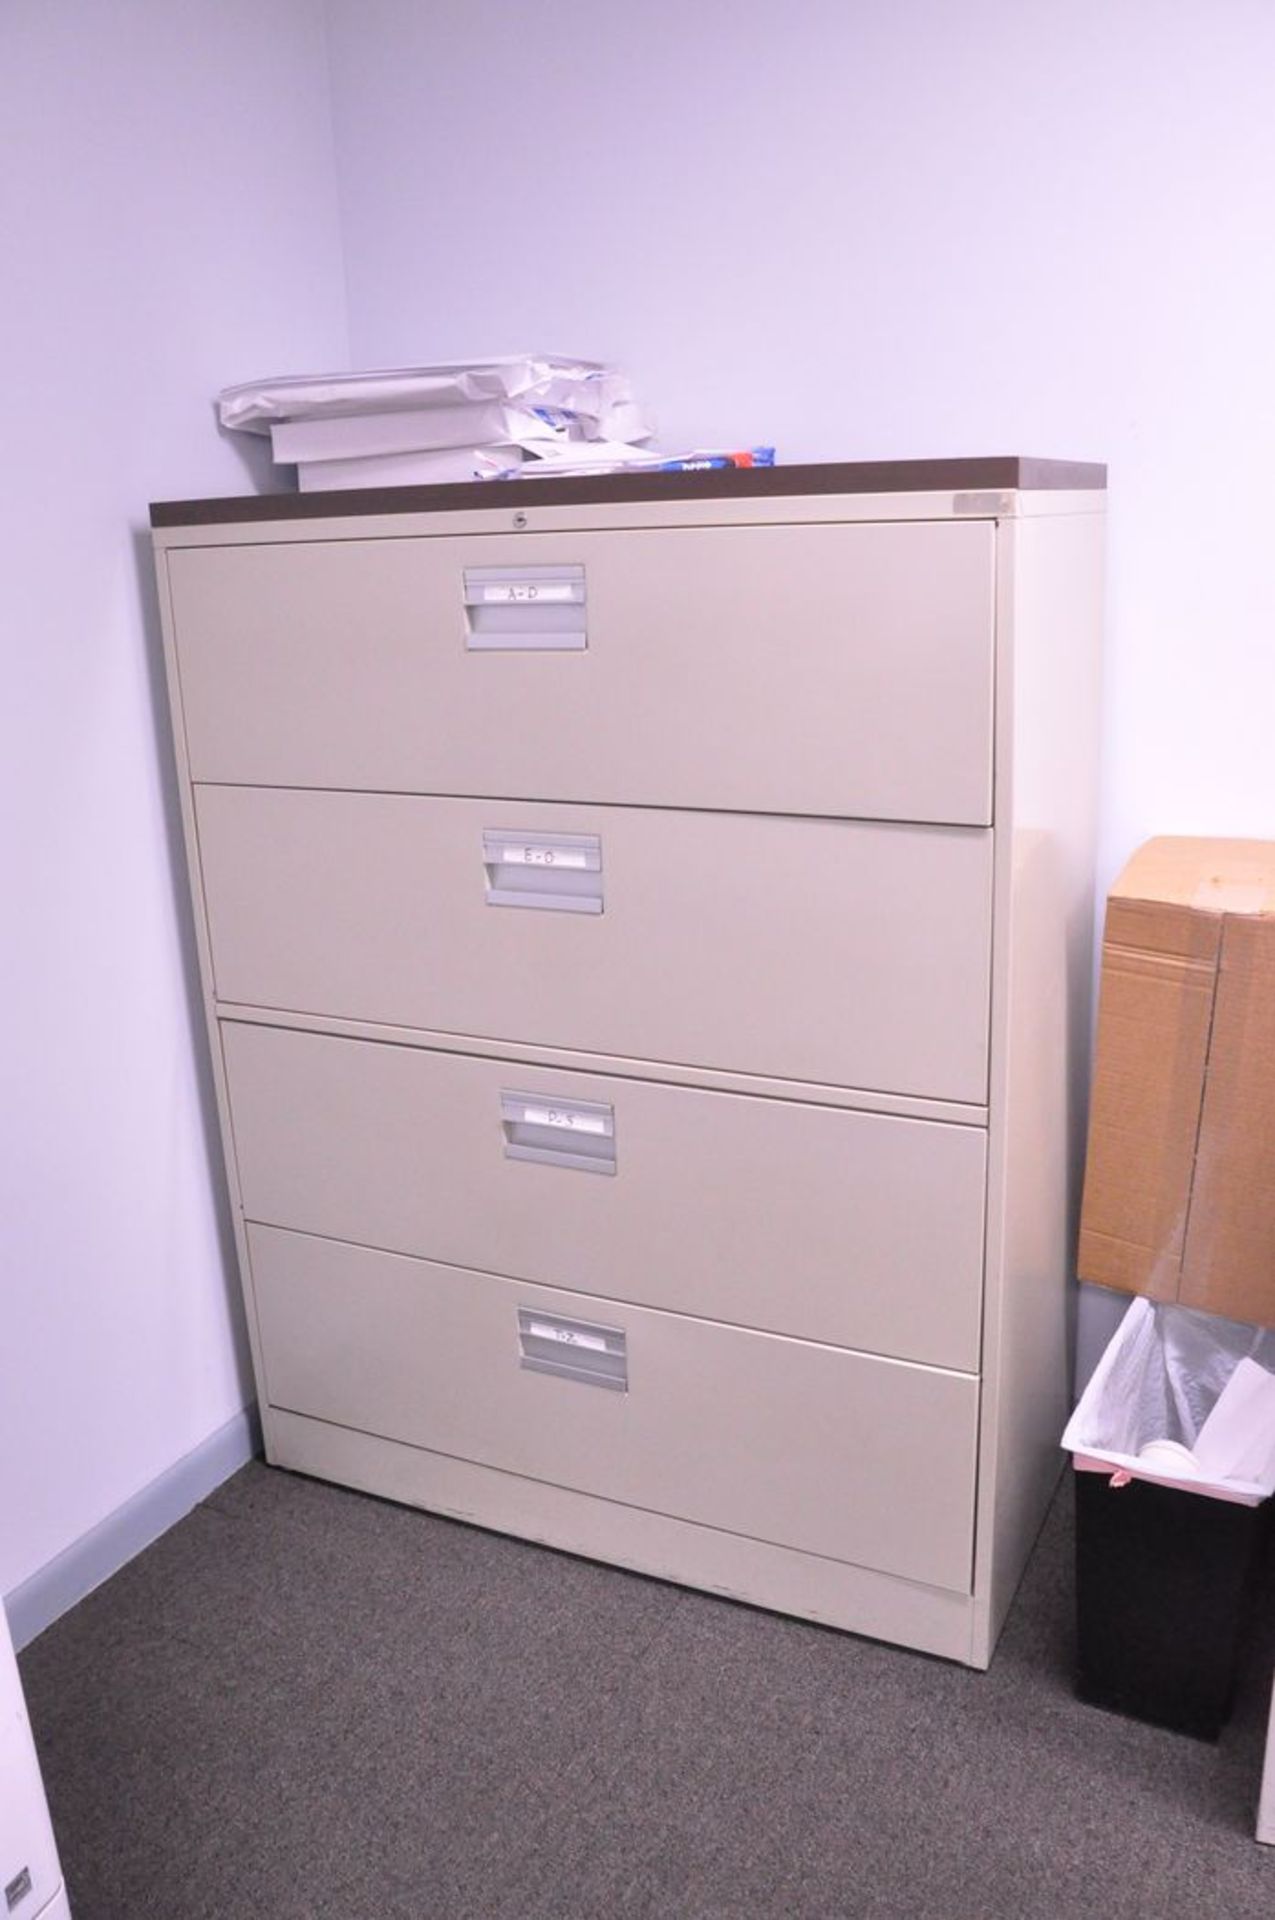 Lot - (3) Desks, (2) 2-Drawer Lateral File Cabinets and (1) 4-Drawer Lateral File Cabinet - Image 3 of 5